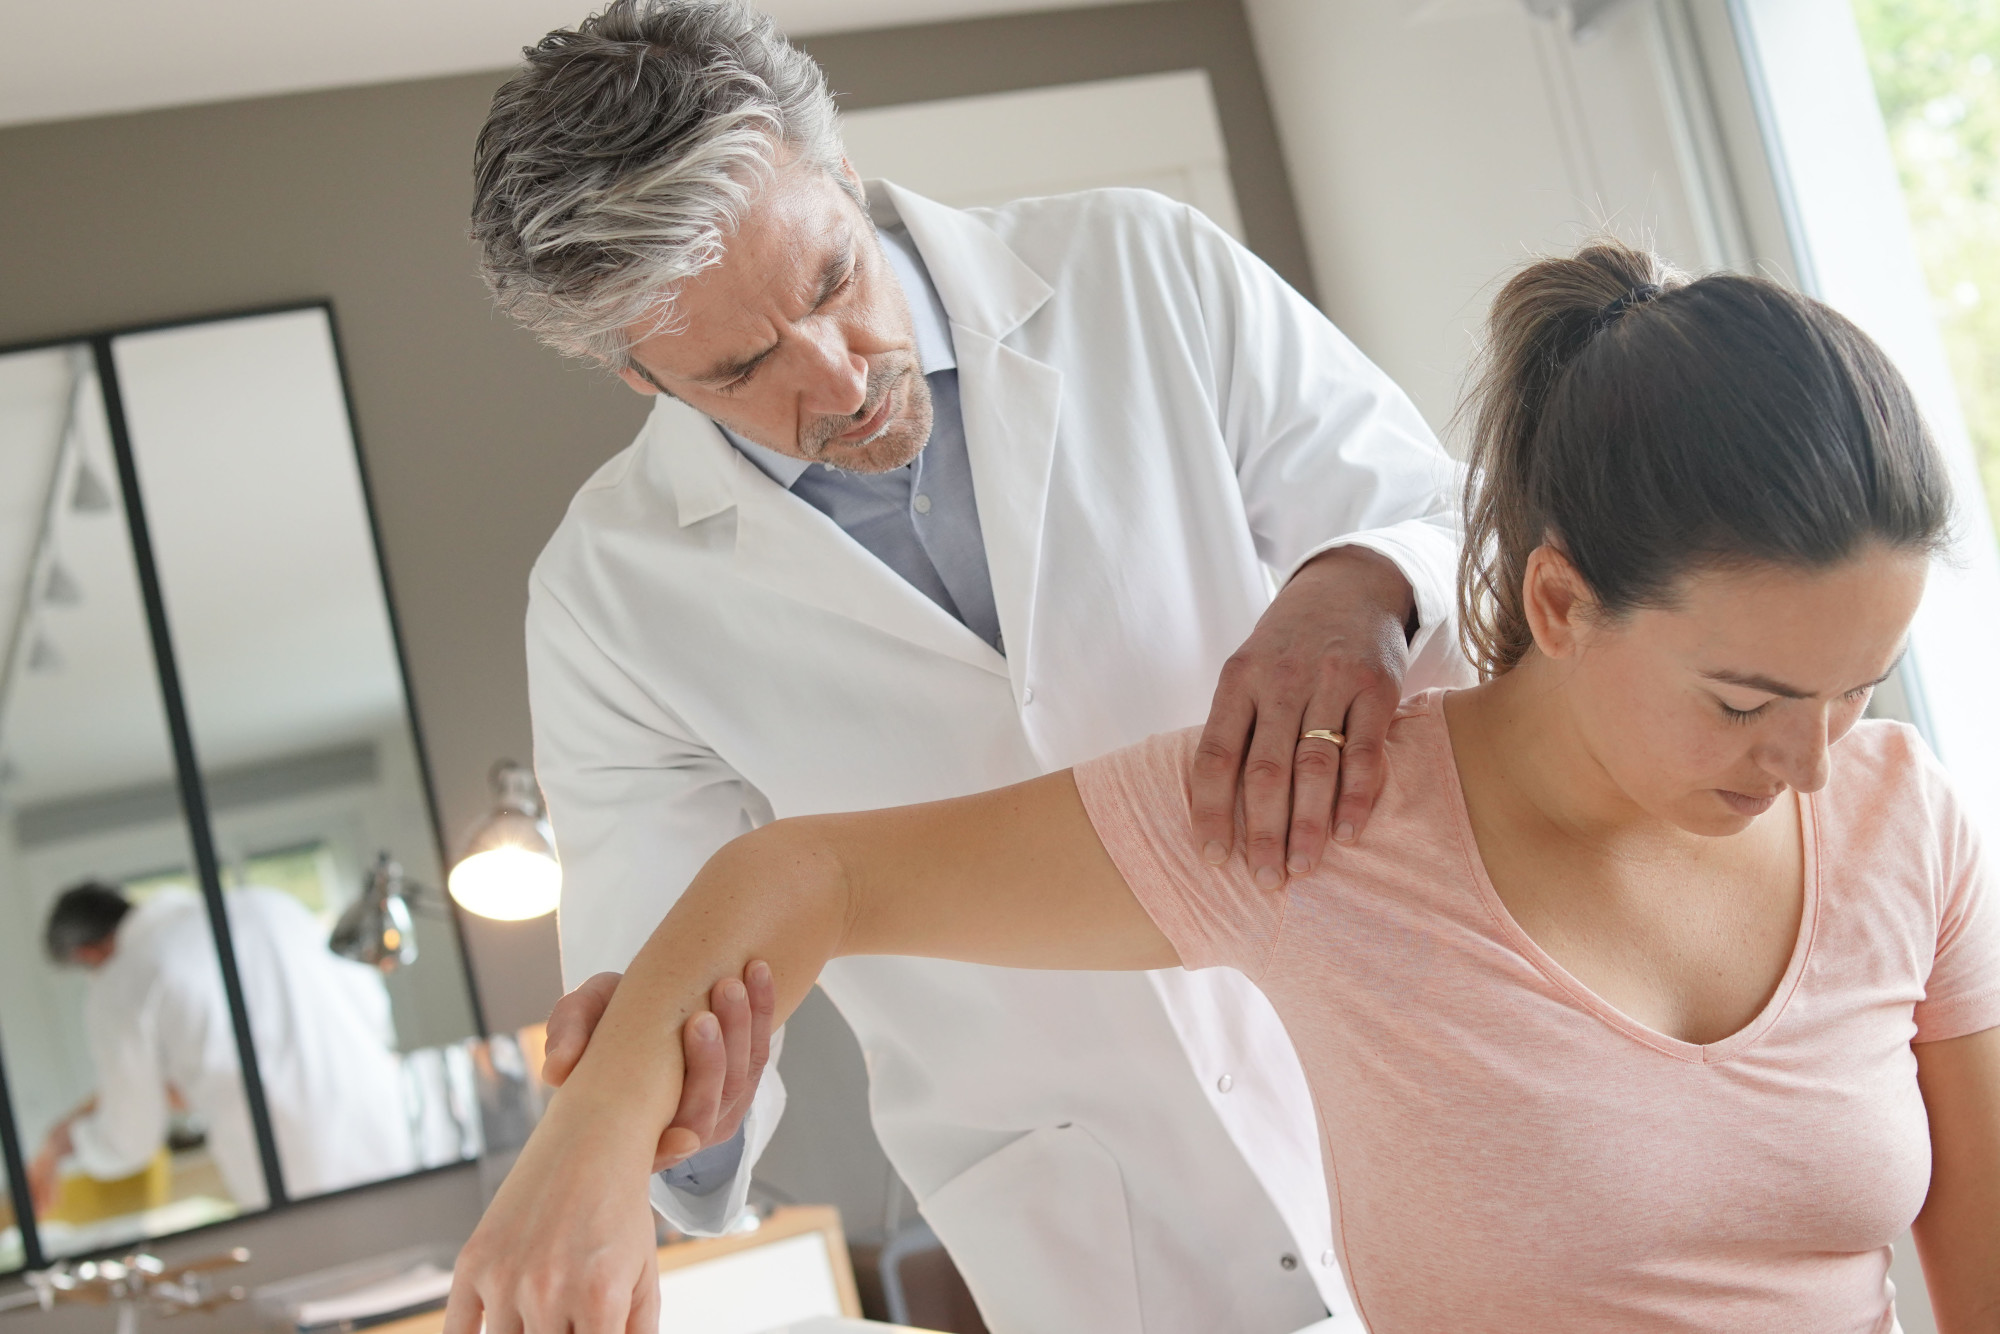 Shoulder joint pain can limit the movement of your arms and lower the quality of your life. Here's what you can do to find relief.